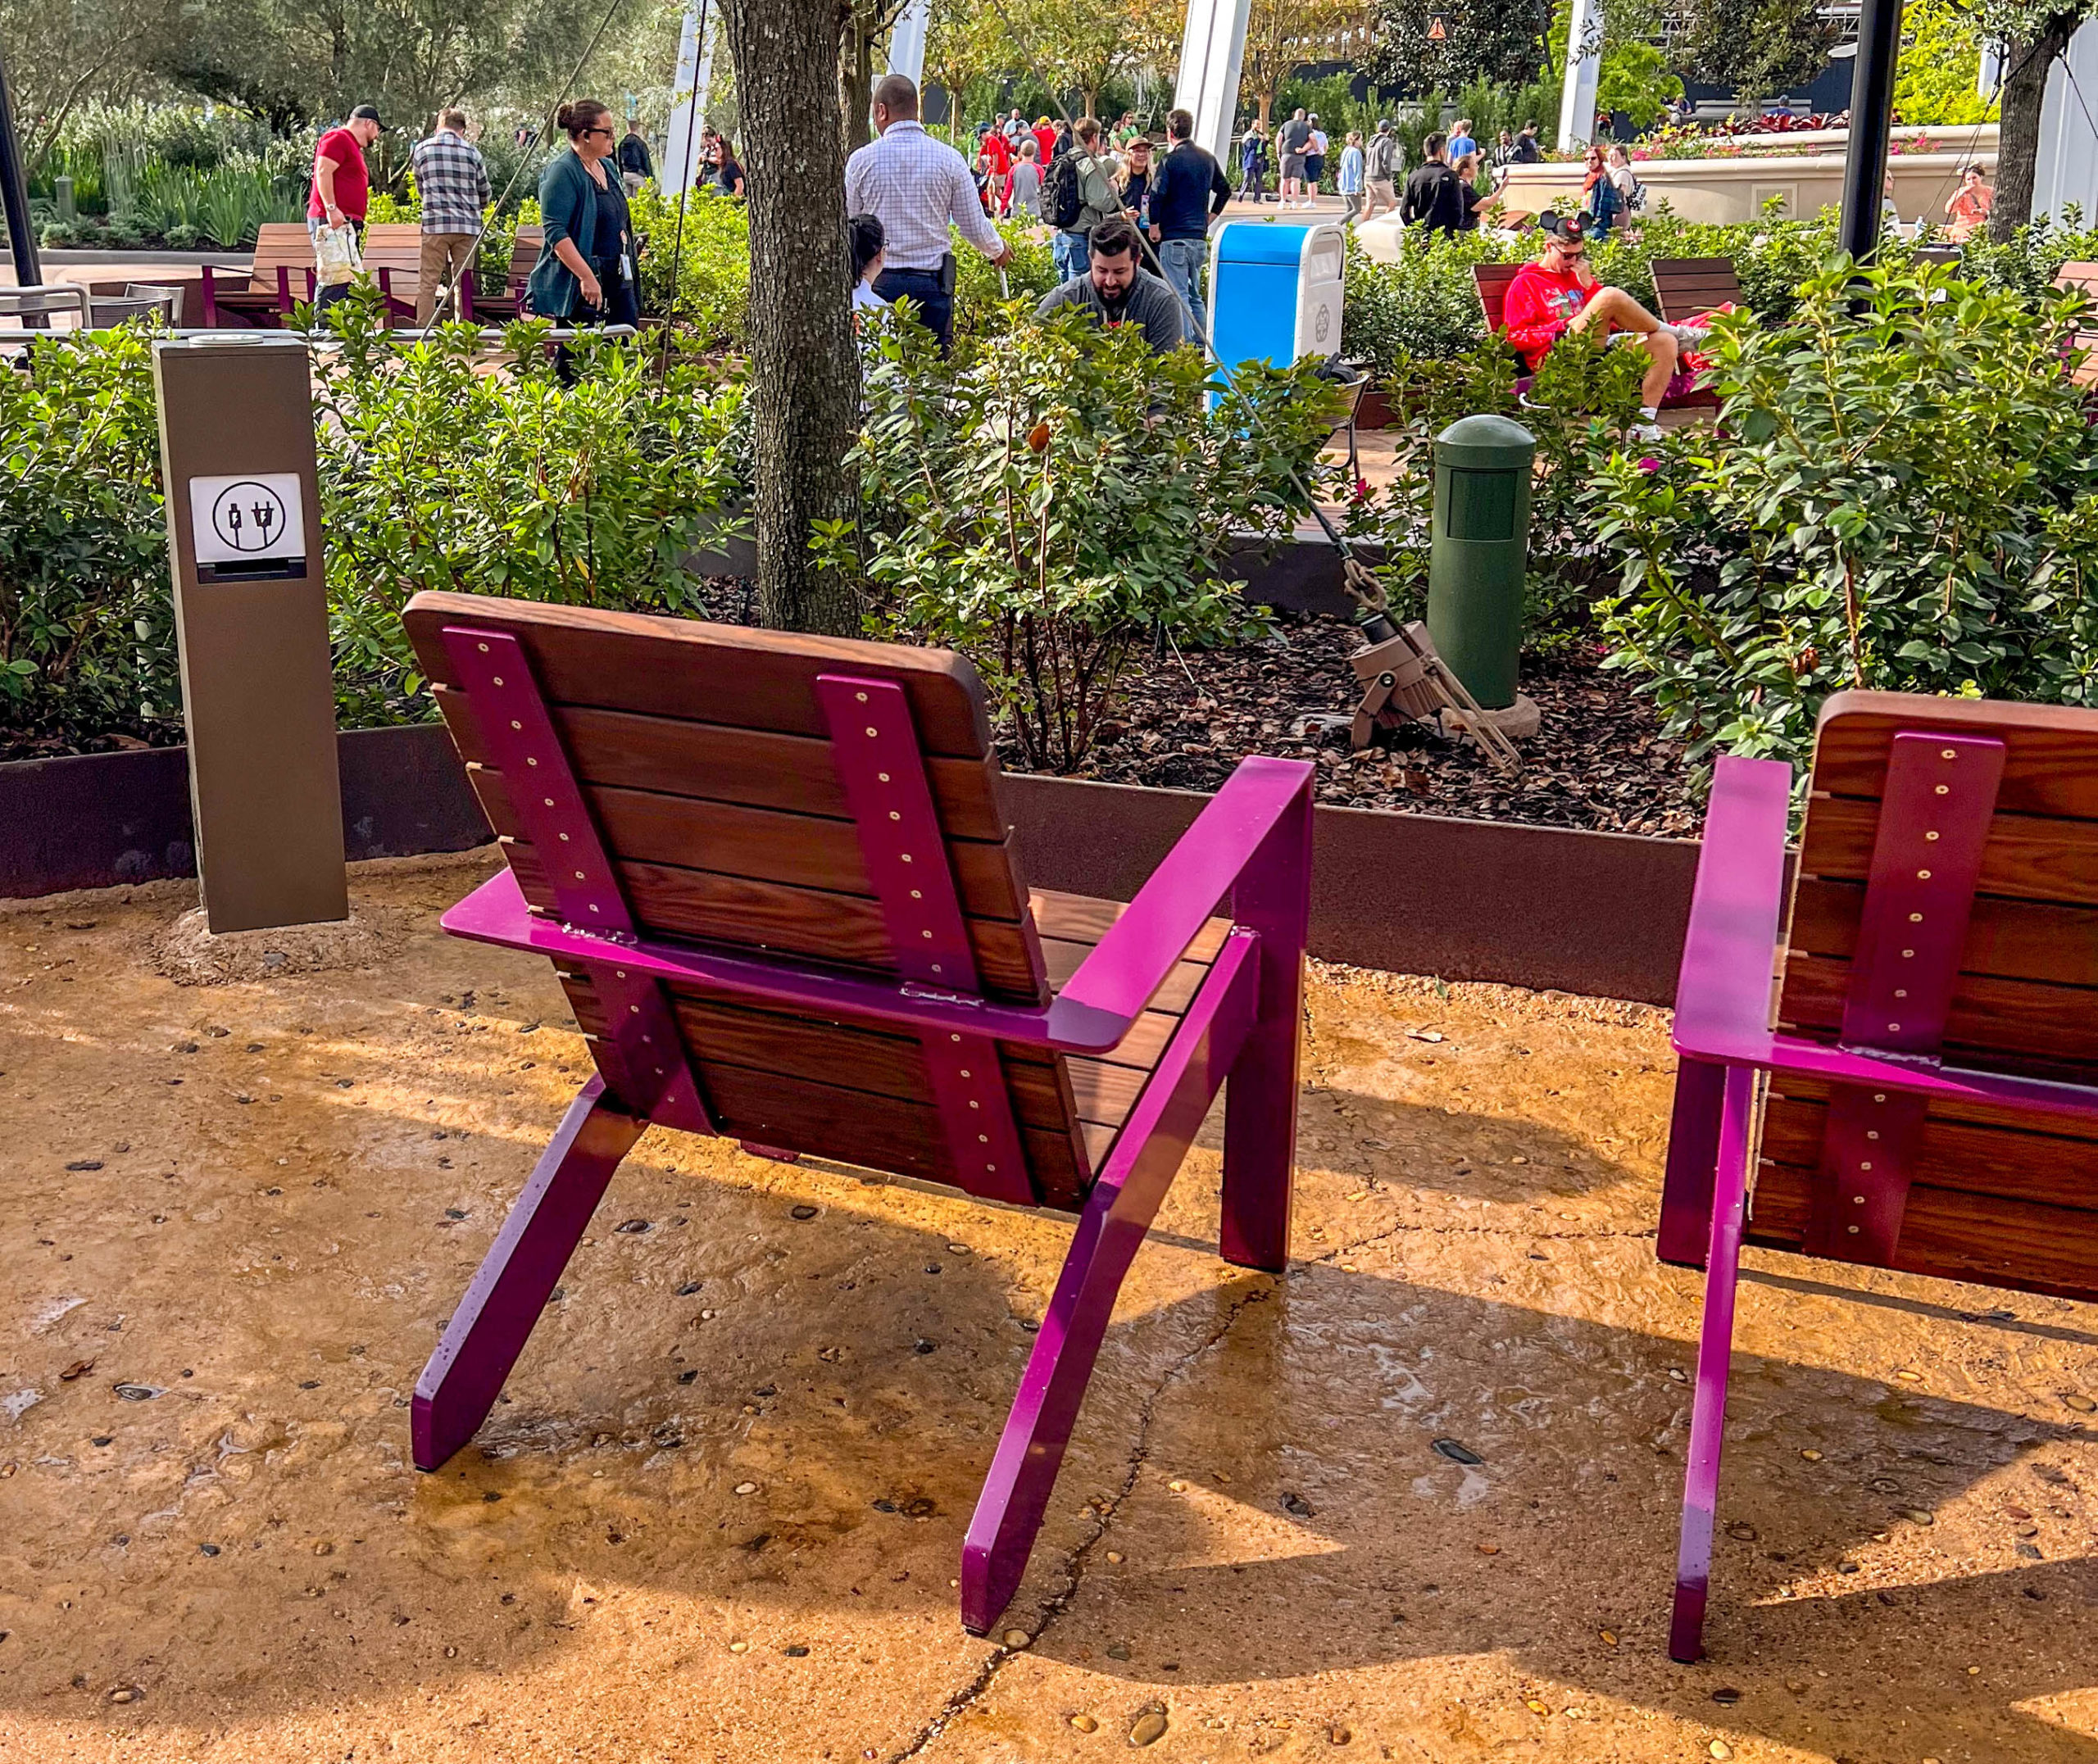 Chairs next to a charging area